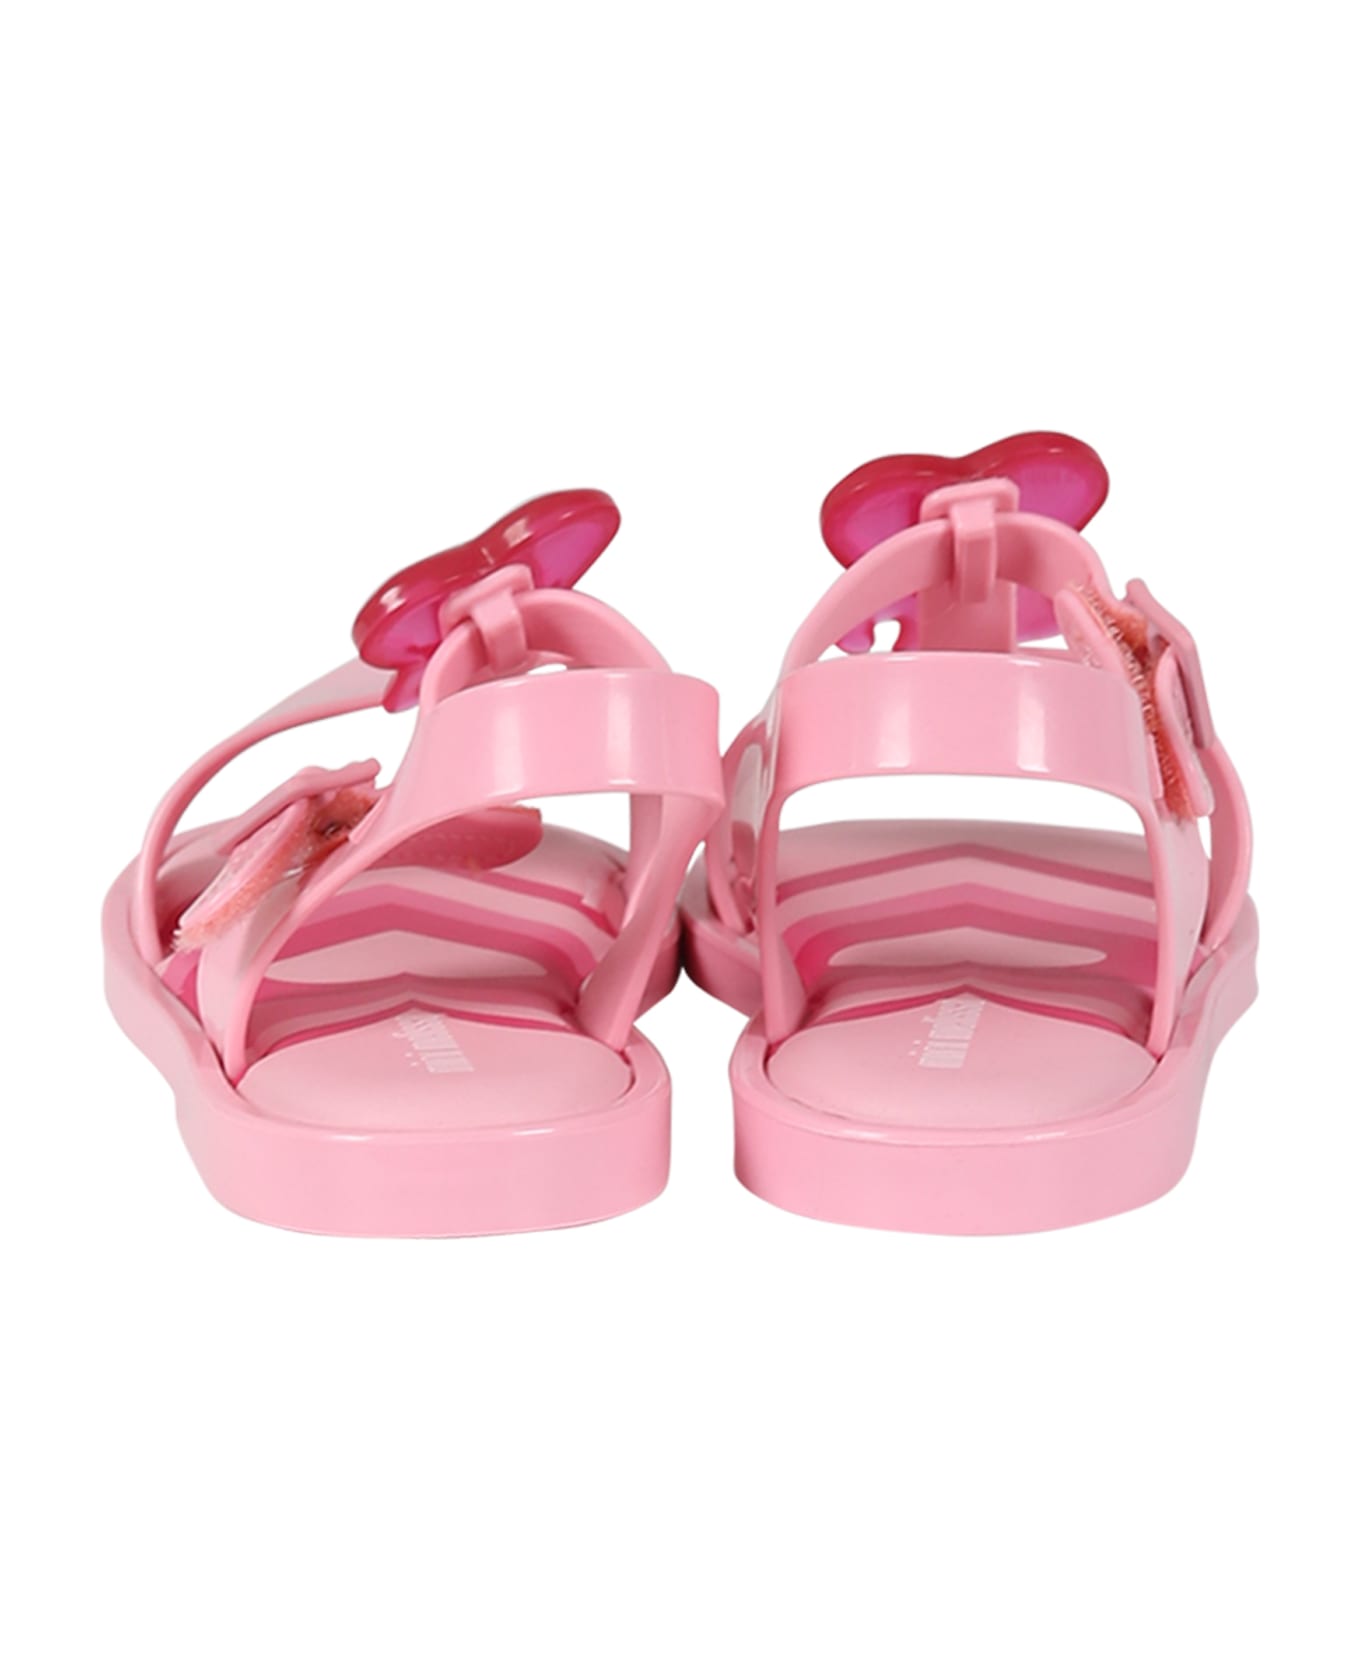 Melissa Pink Sandals For Girl With Lollipop - Pink シューズ